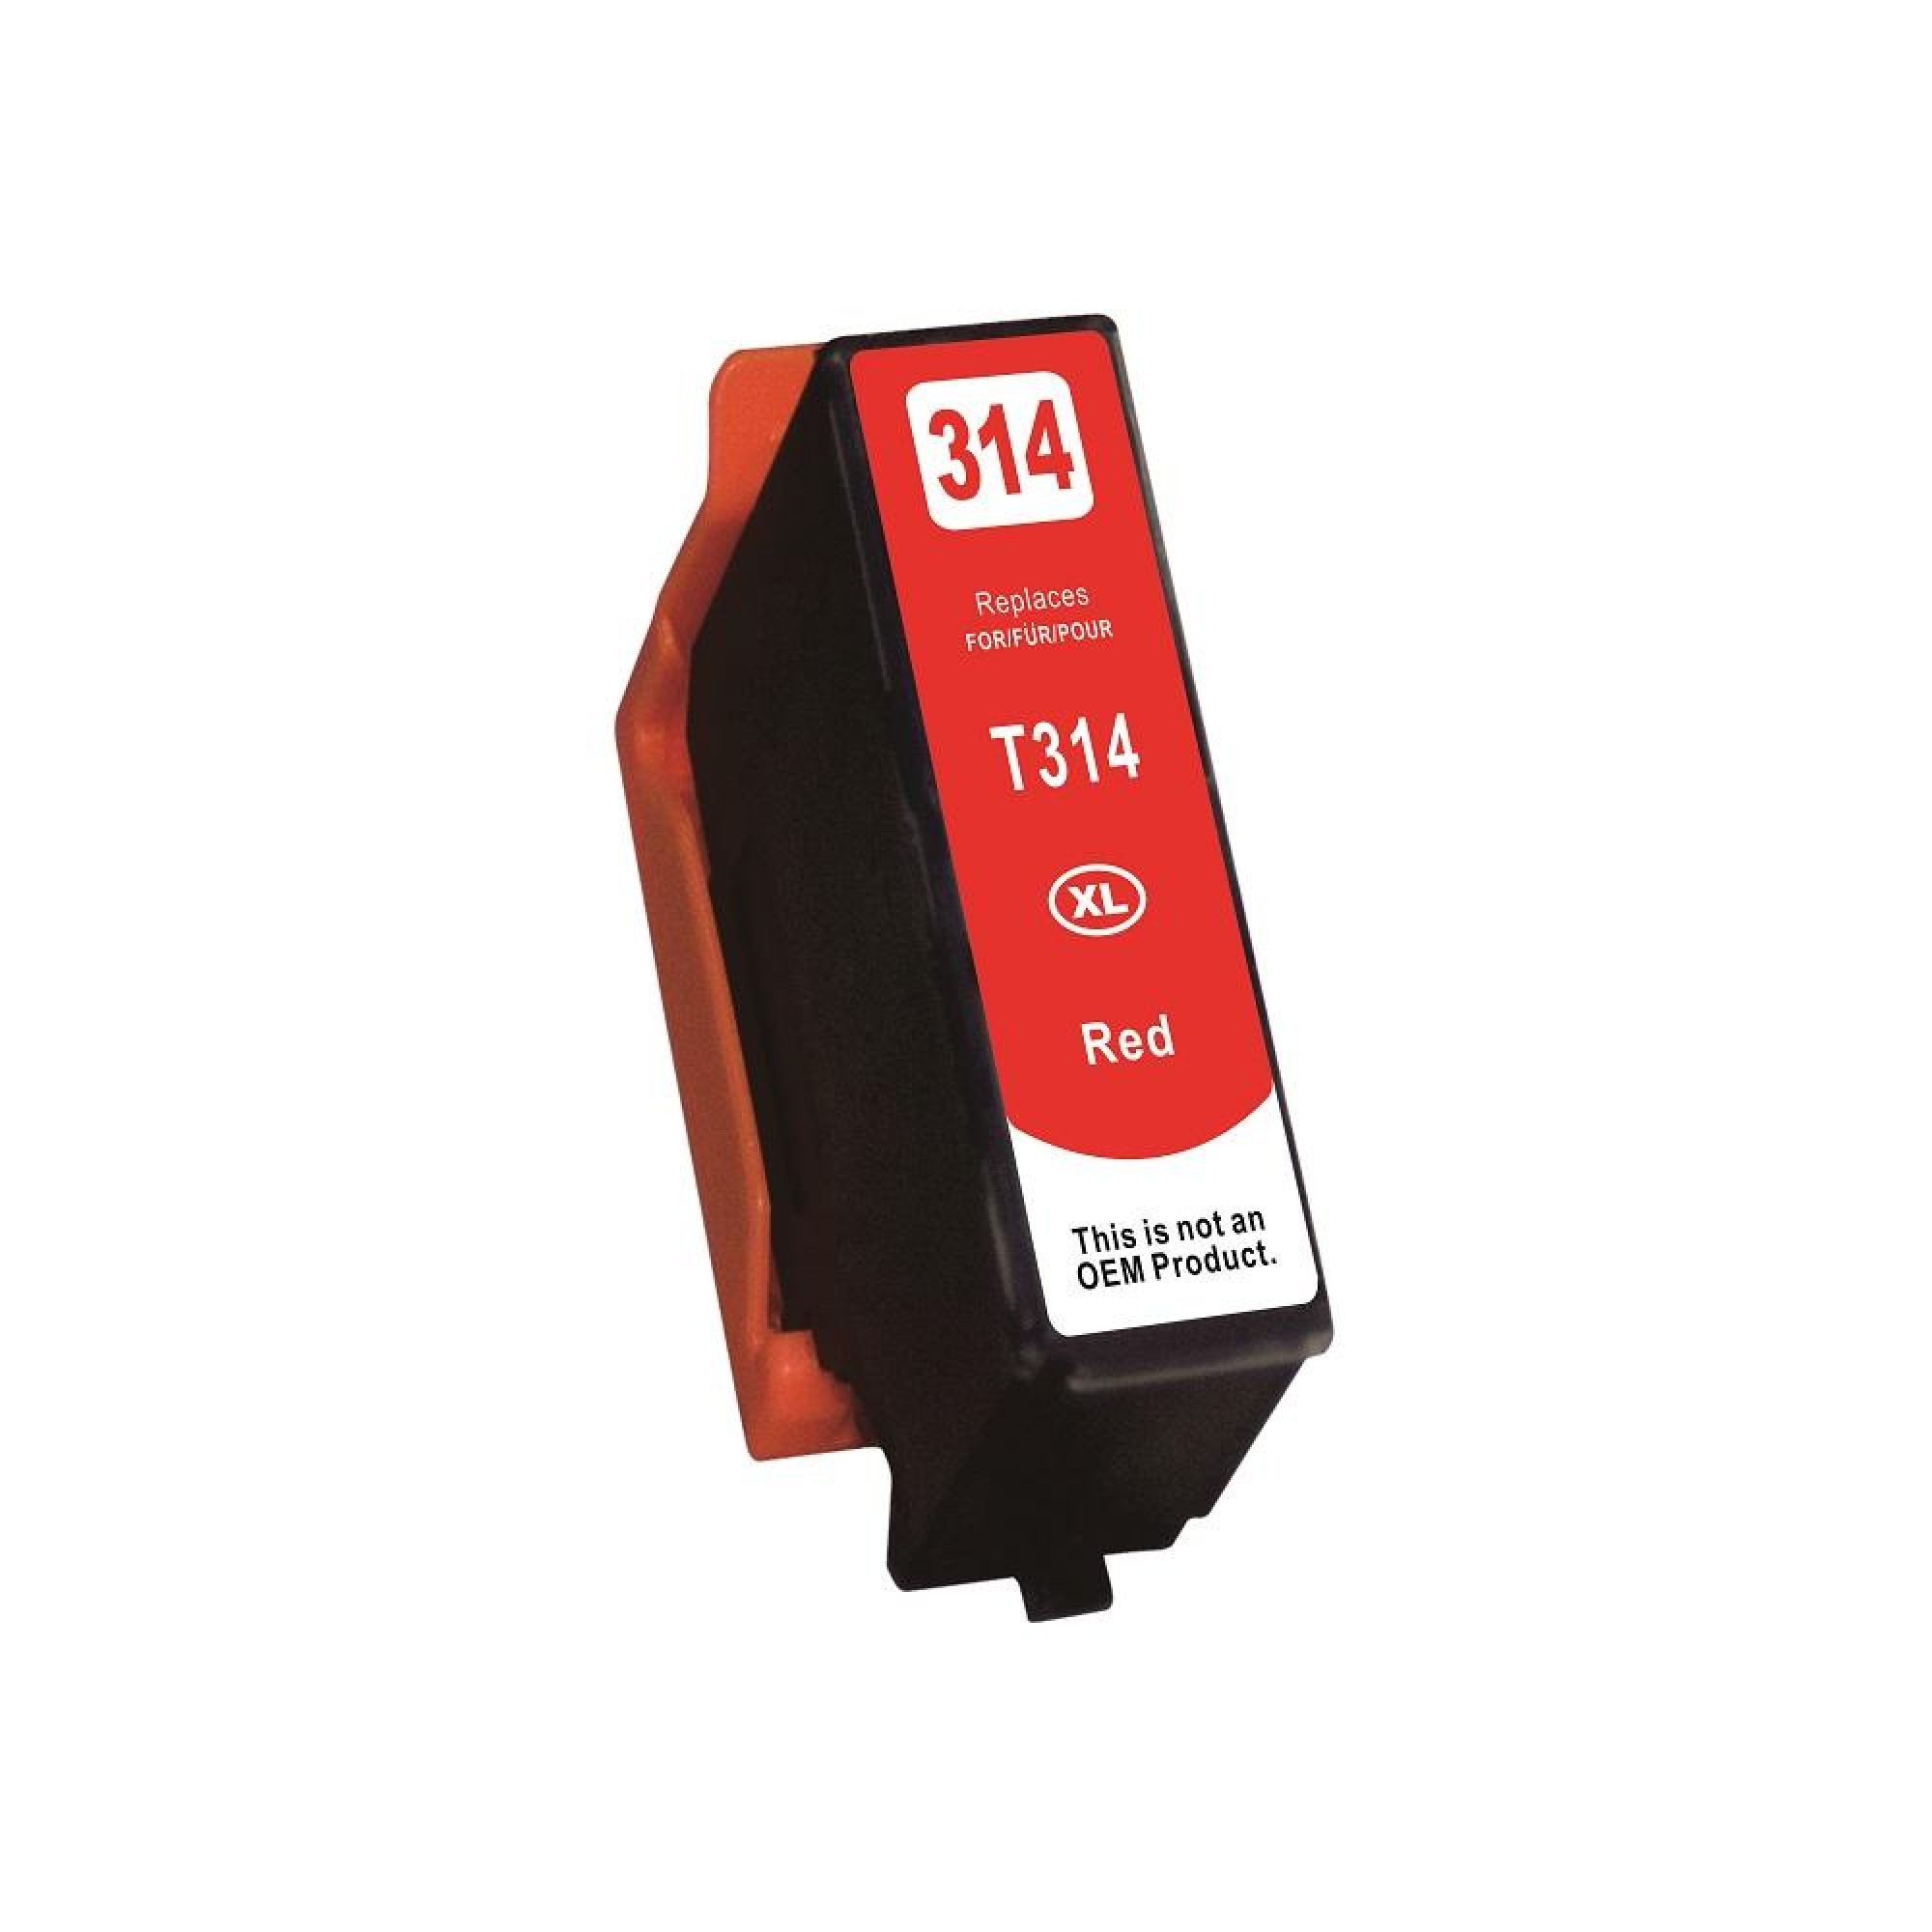 Epson 314 Red Cartridge Compatible